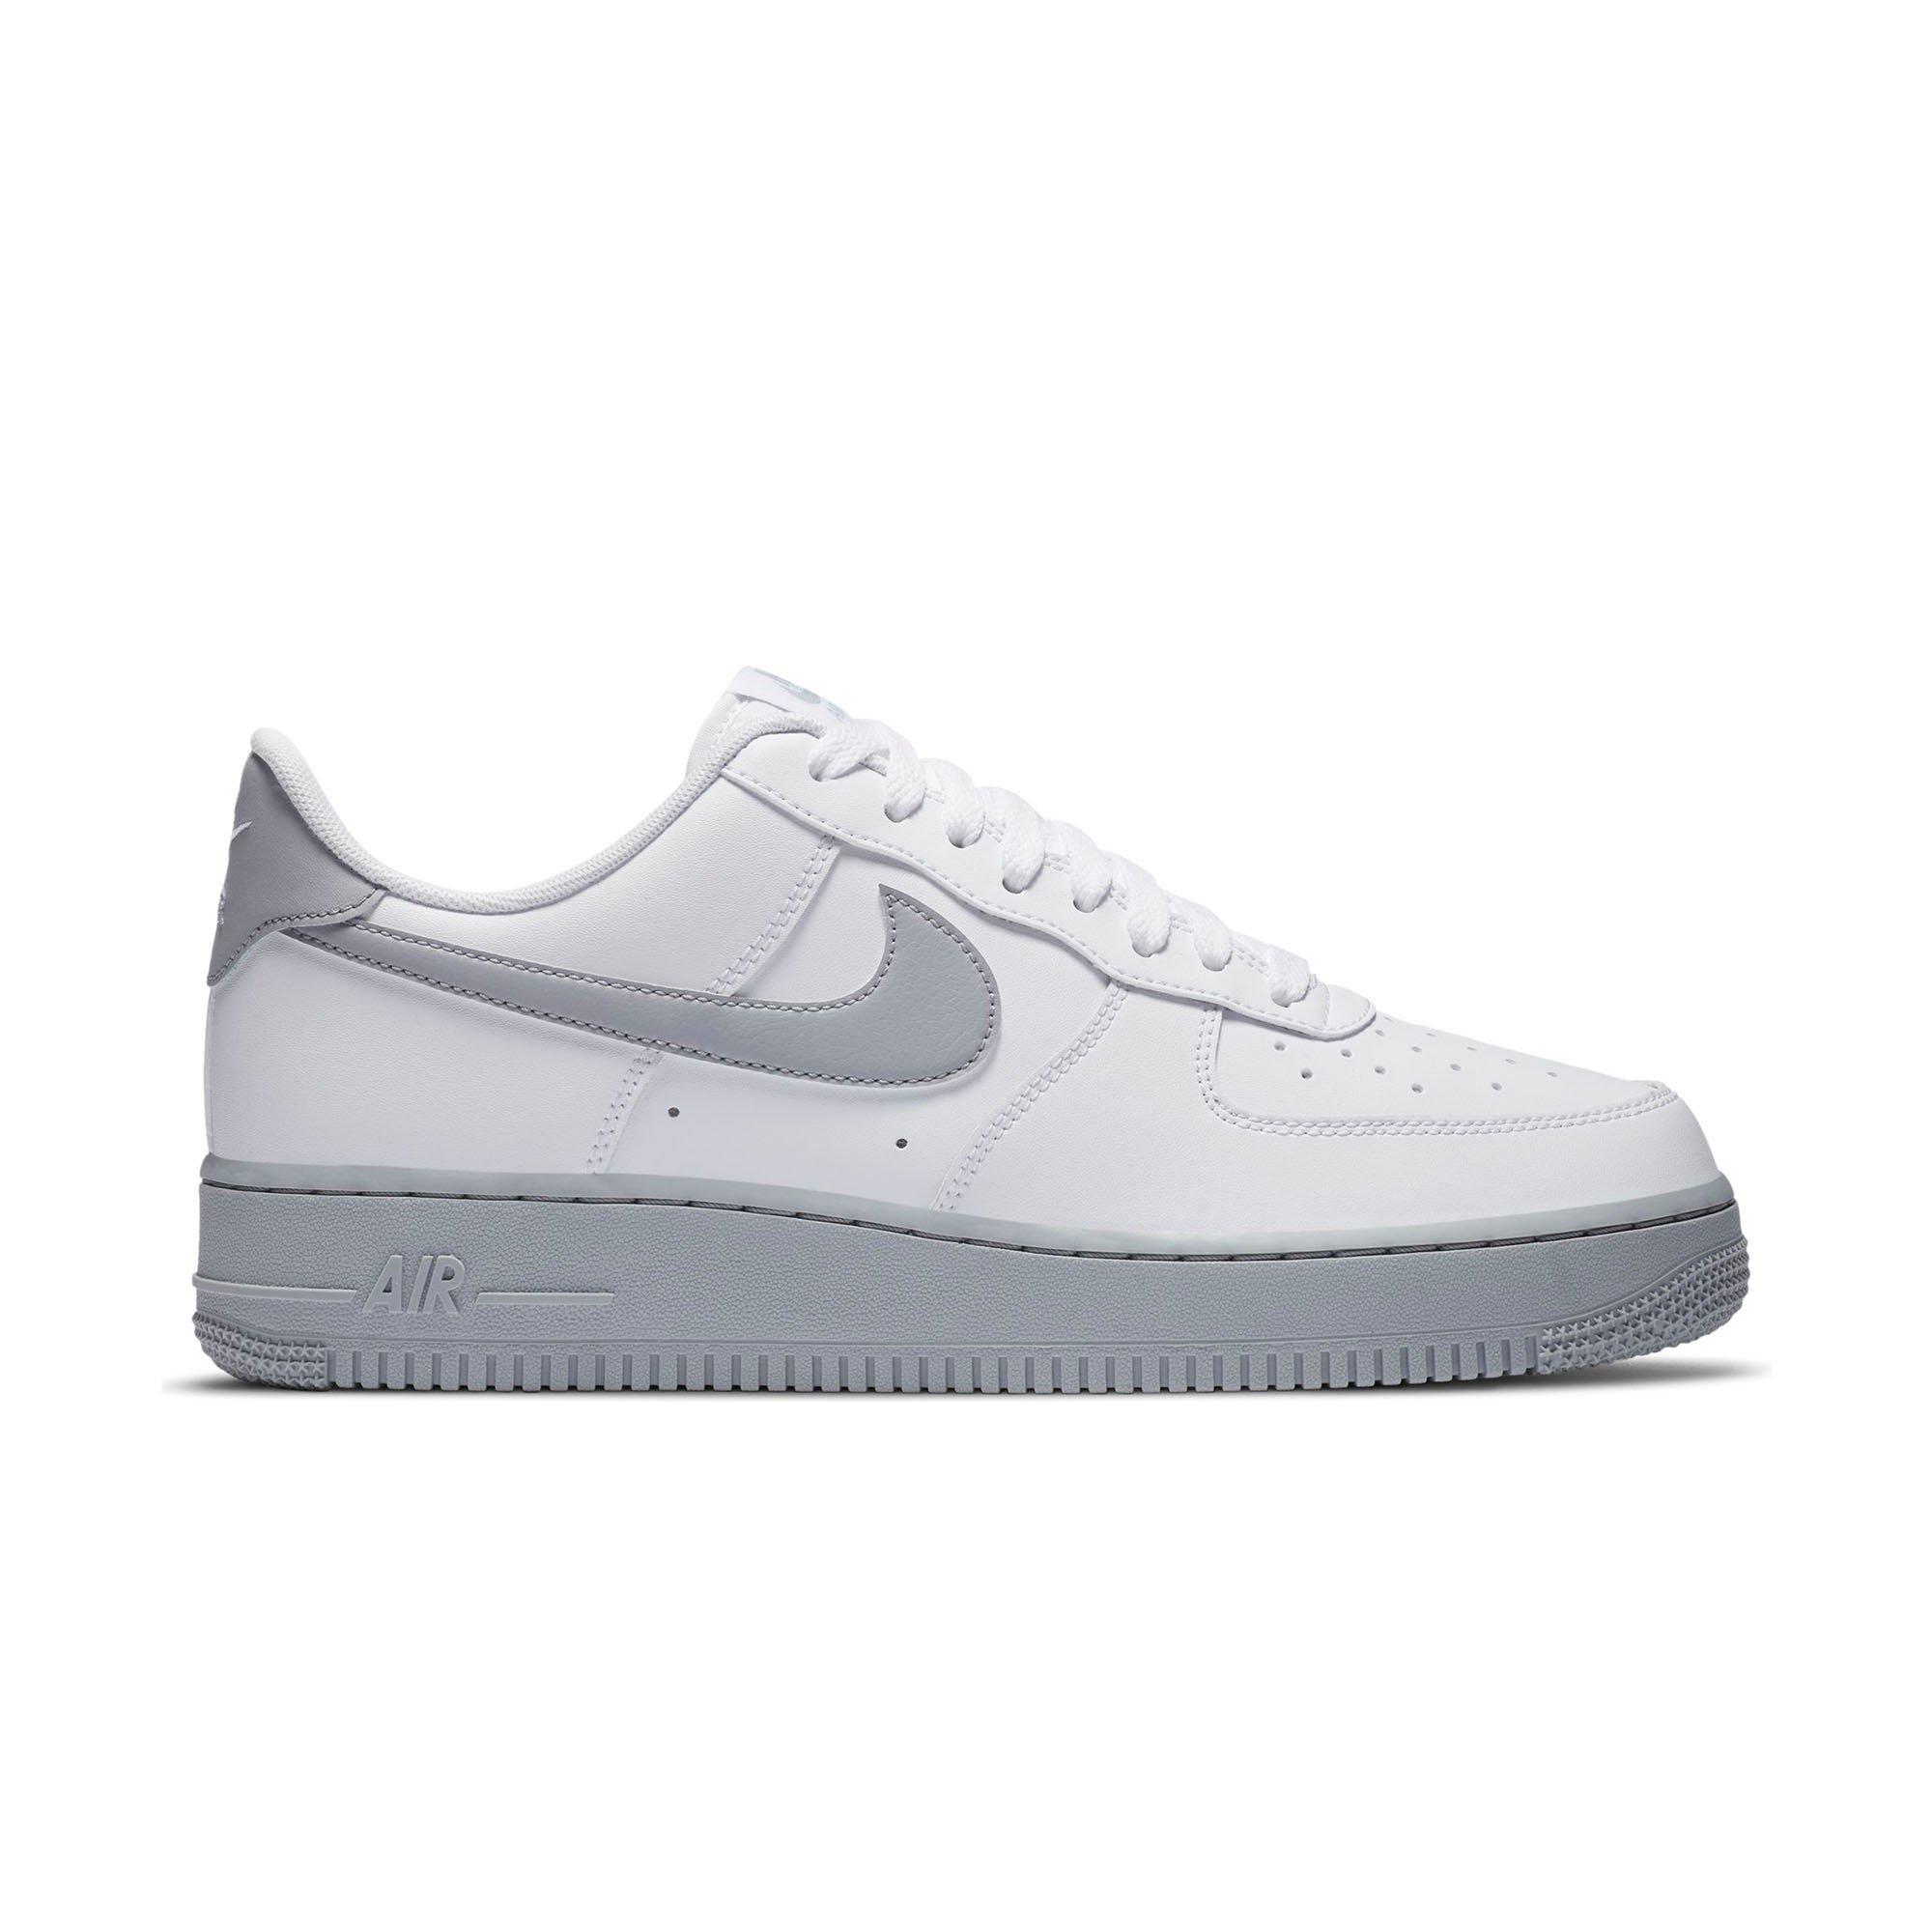 air force 1s in store near me